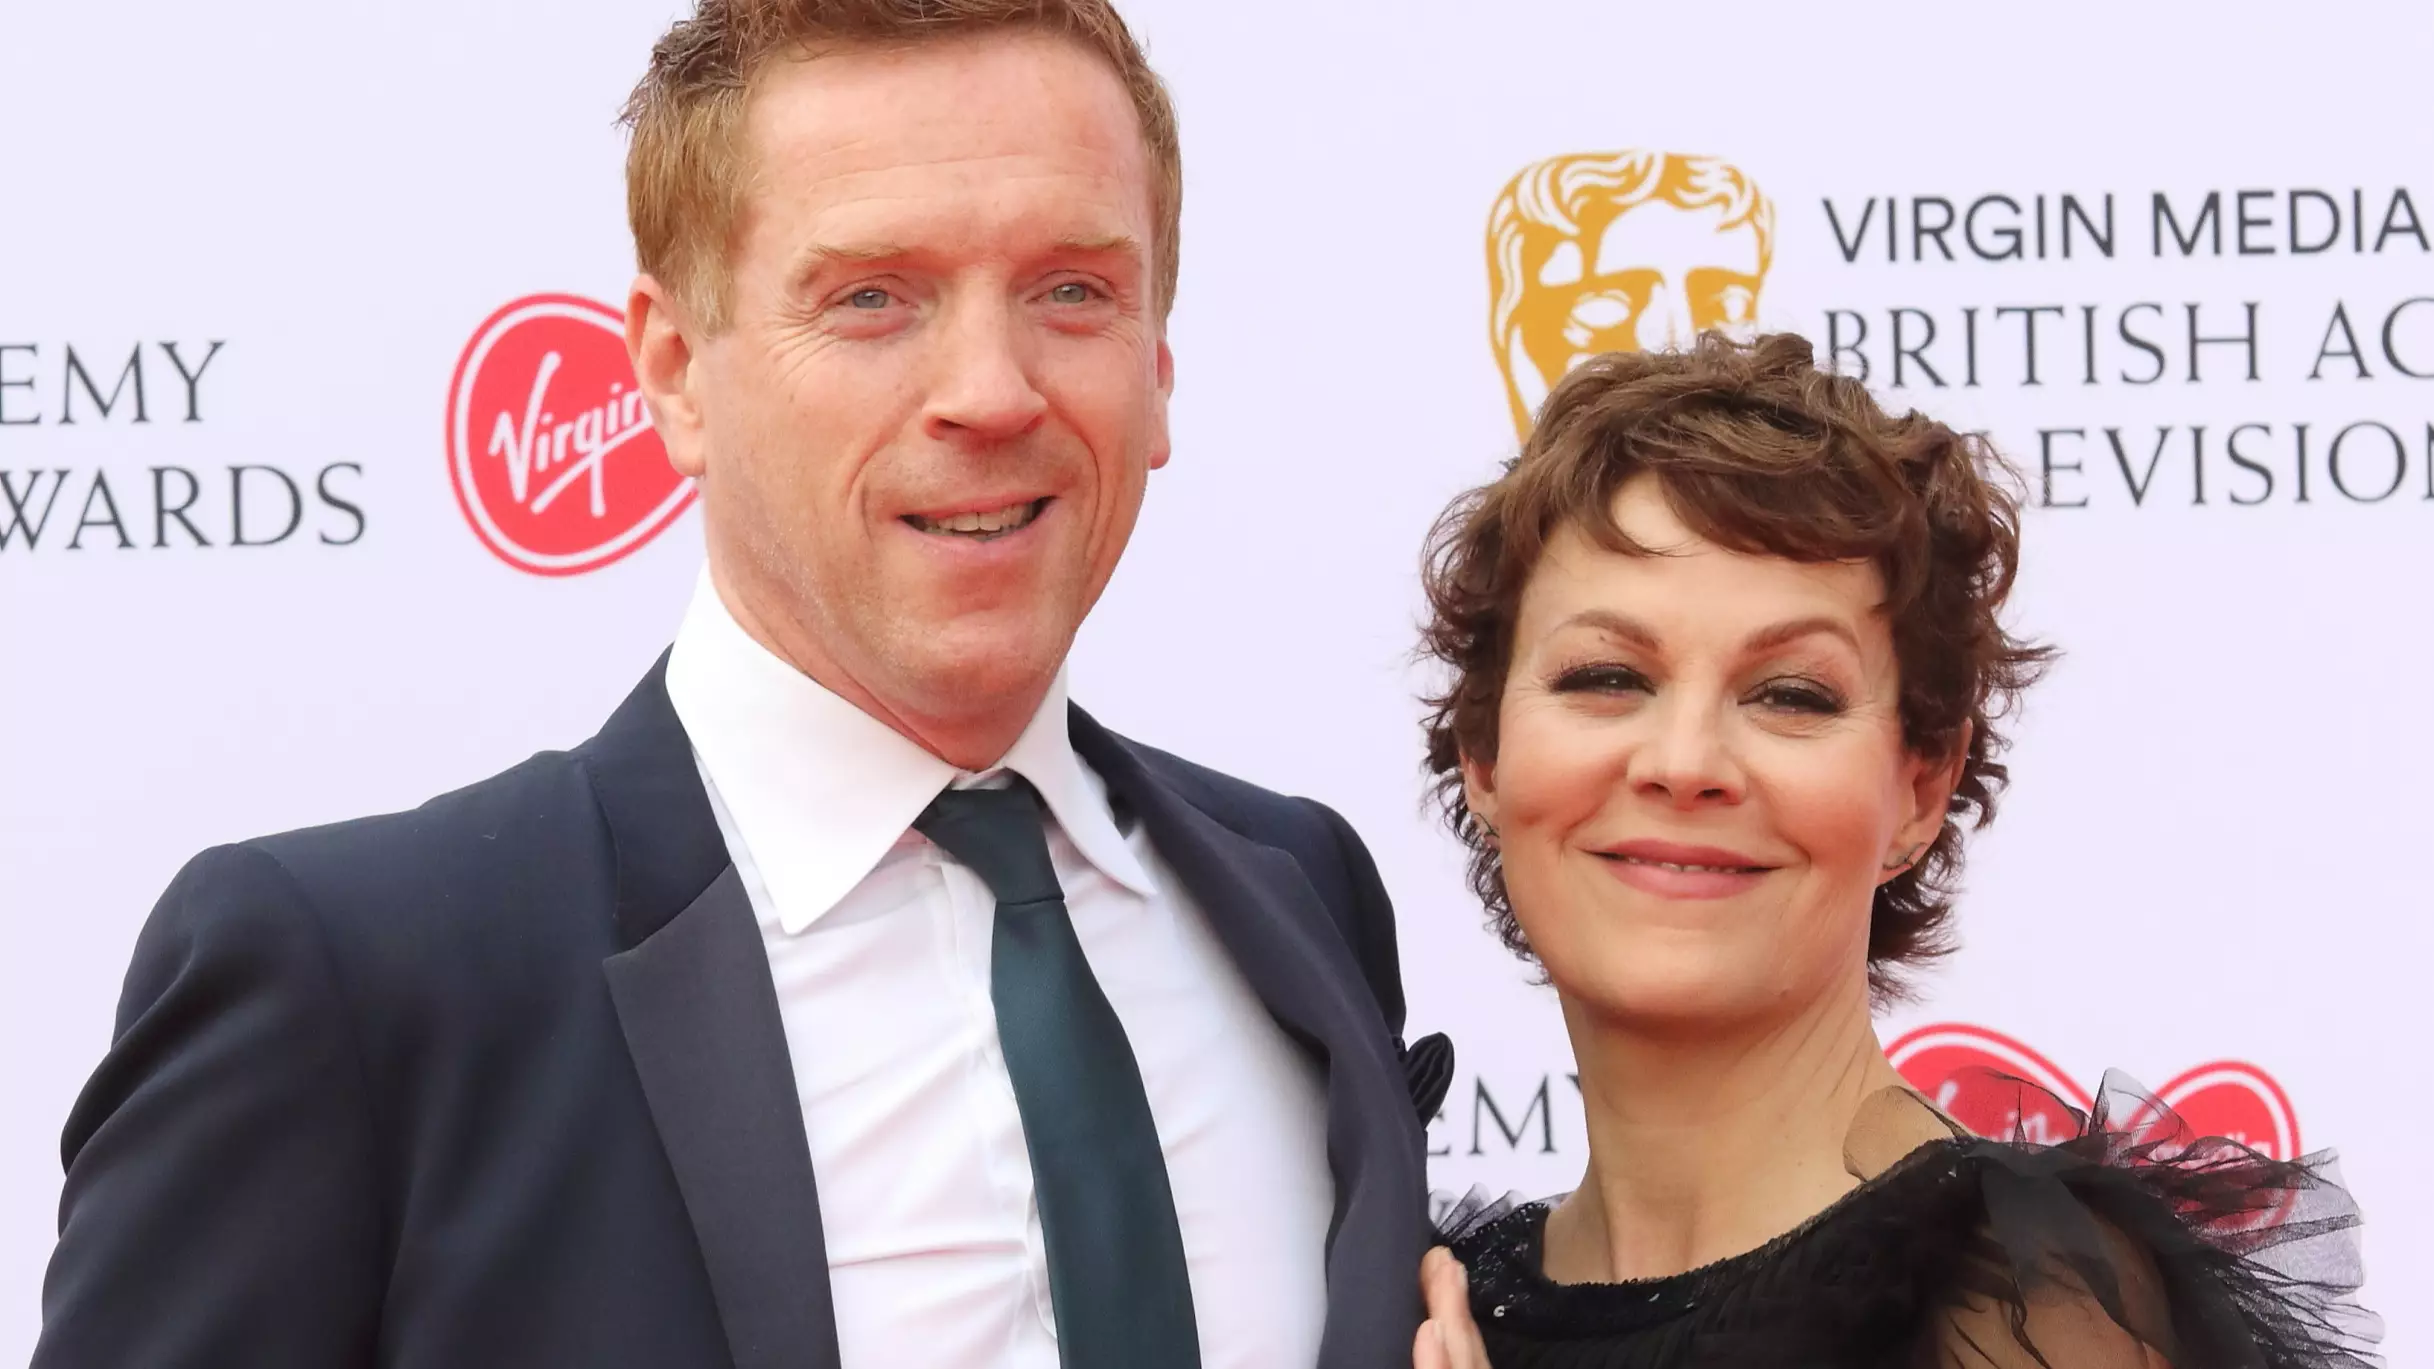 Helen McCrory Told Damien Lewis To Have 'Lots of Girlfriends' After Her Death